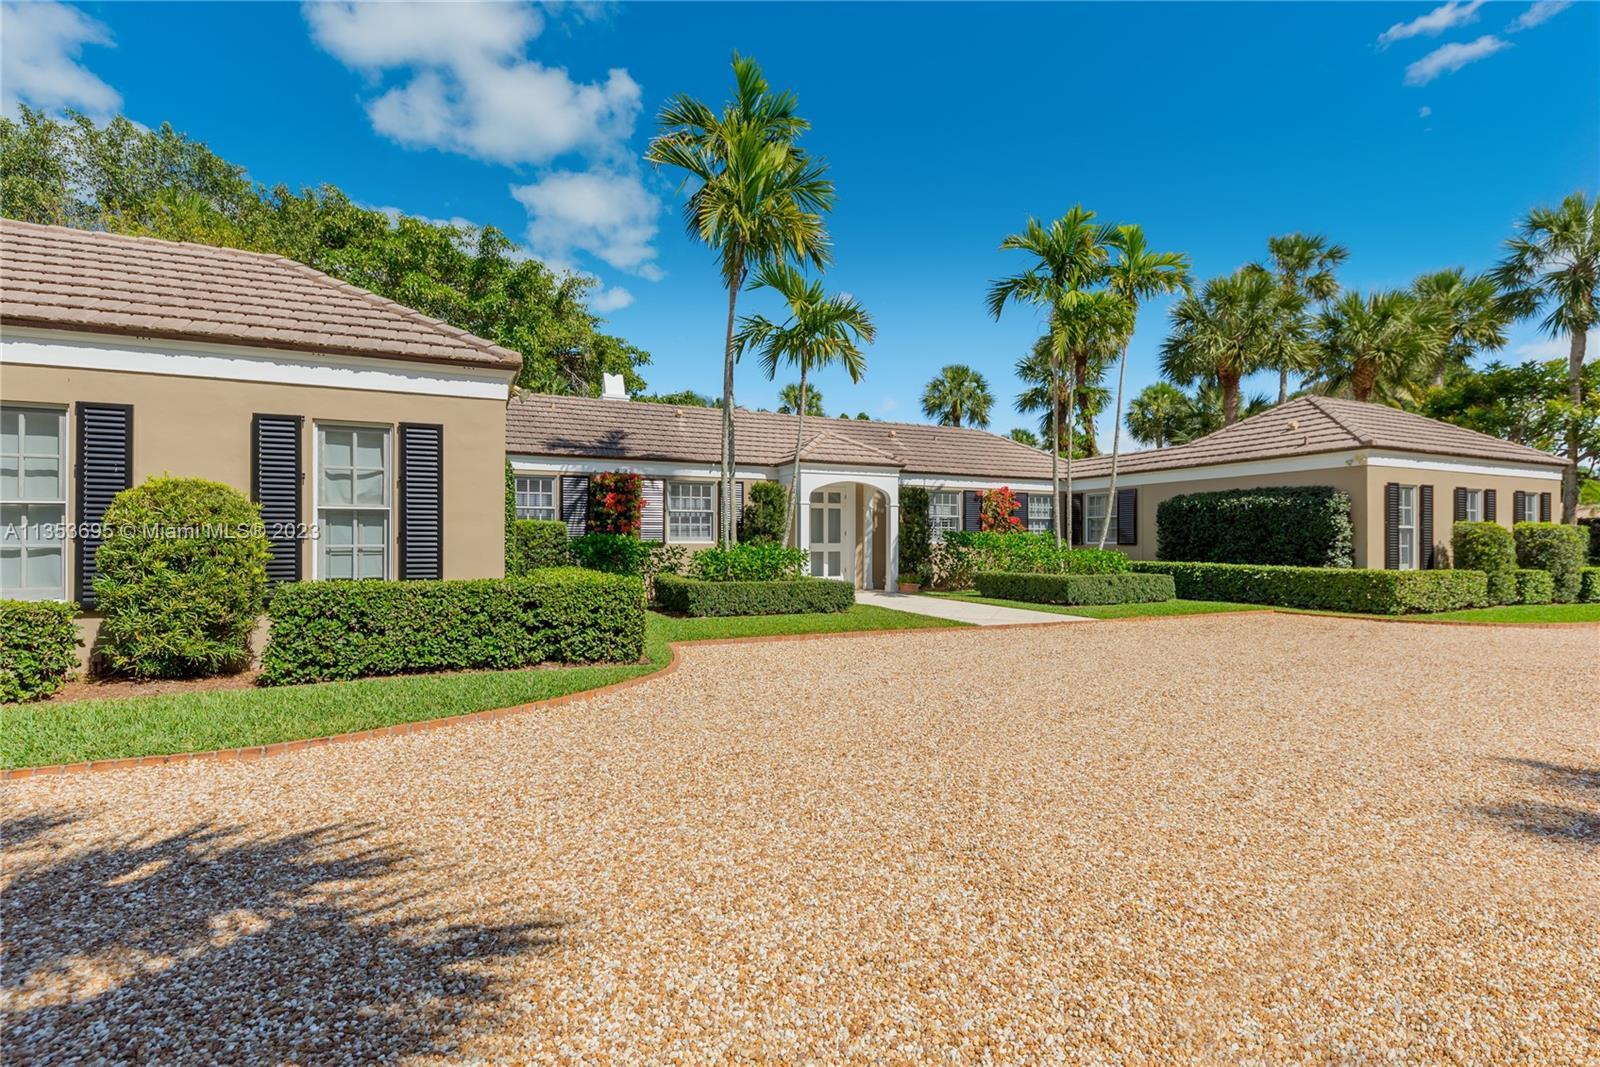 Jupiter Island 4-bedroom home, with 4,112 square feet total living space. This home includes a large